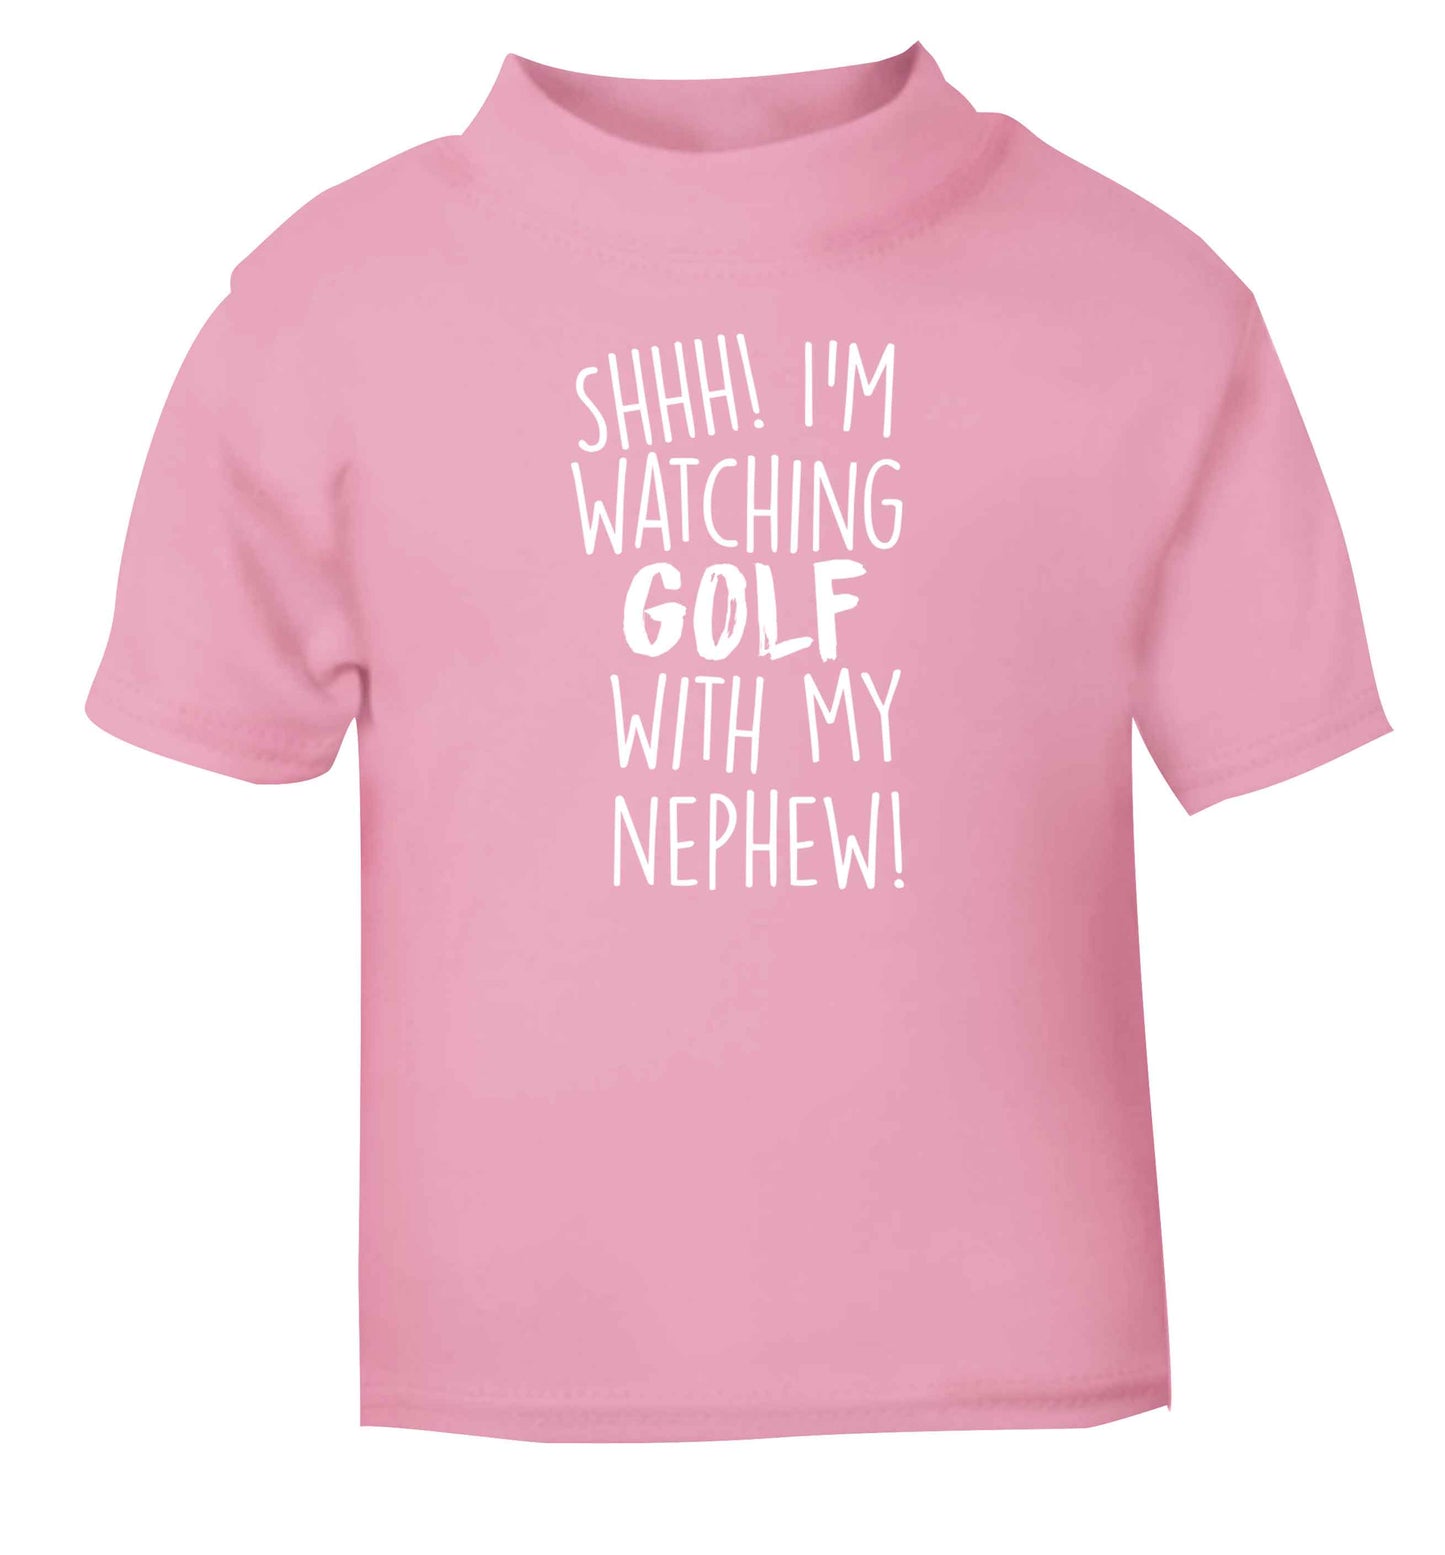 Shh I'm watching golf with my nephew light pink Baby Toddler Tshirt 2 Years